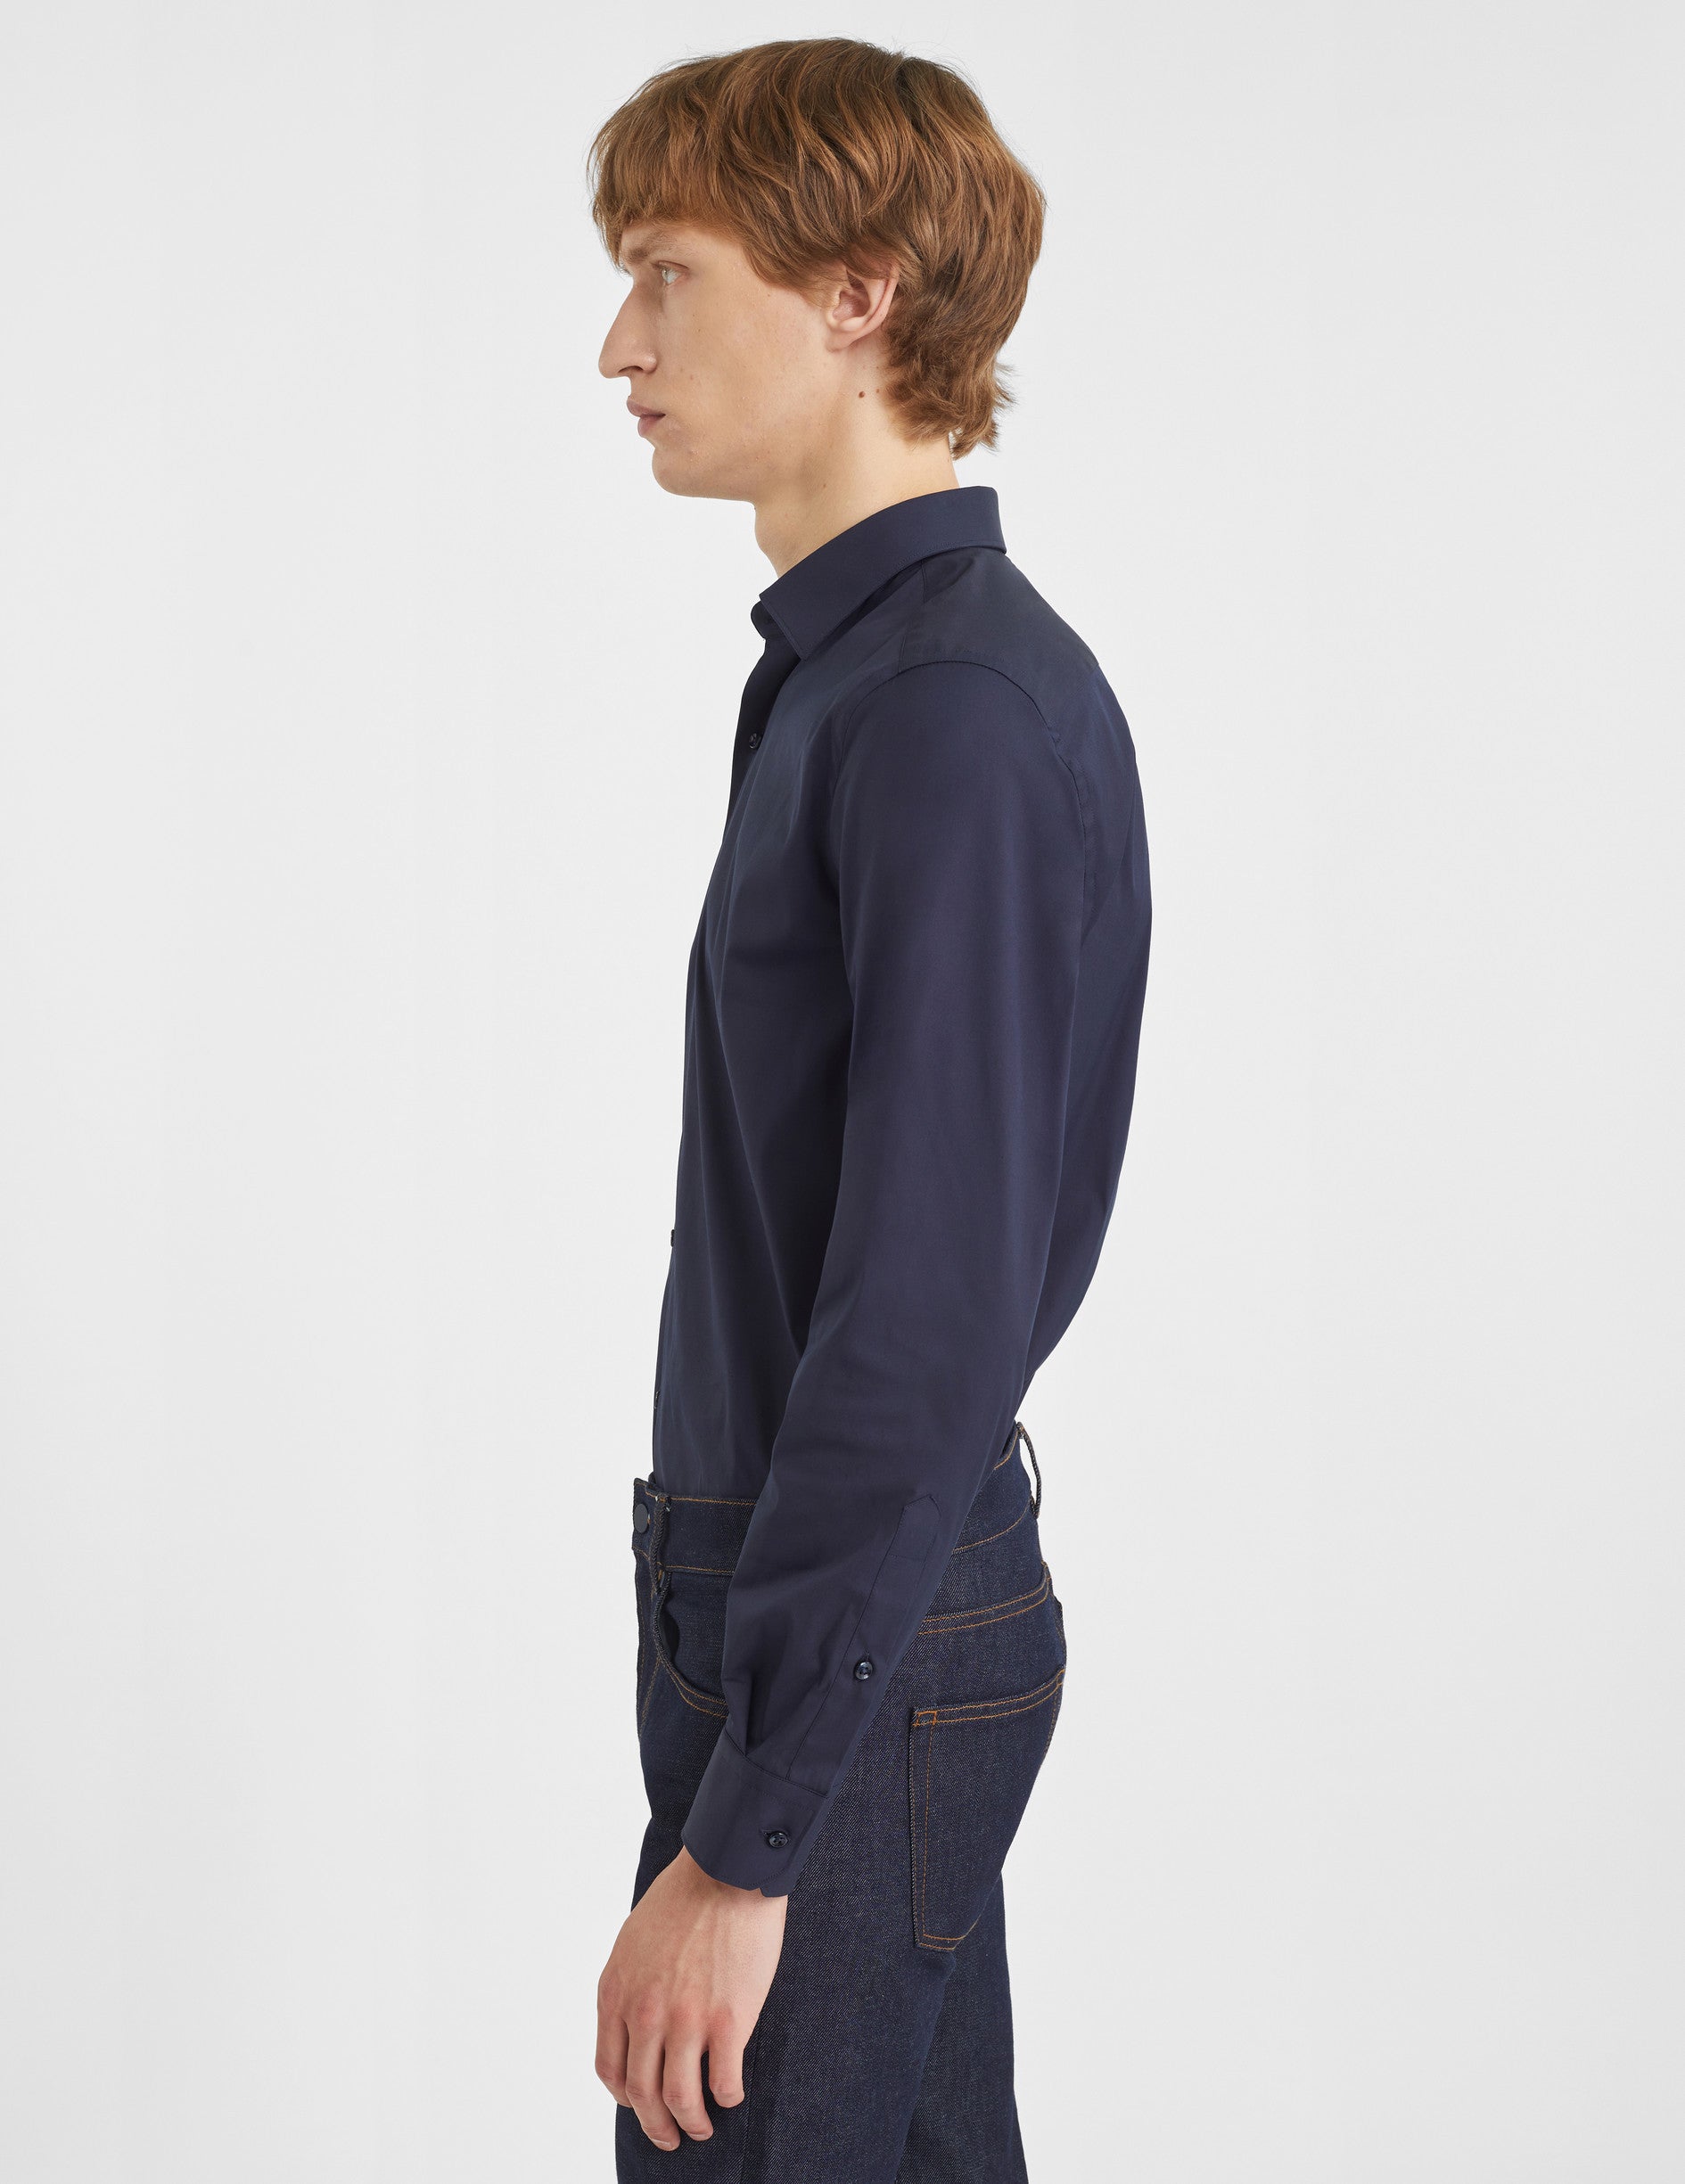 Fitted navy stretch shirt - Poplin - Figaret Collar